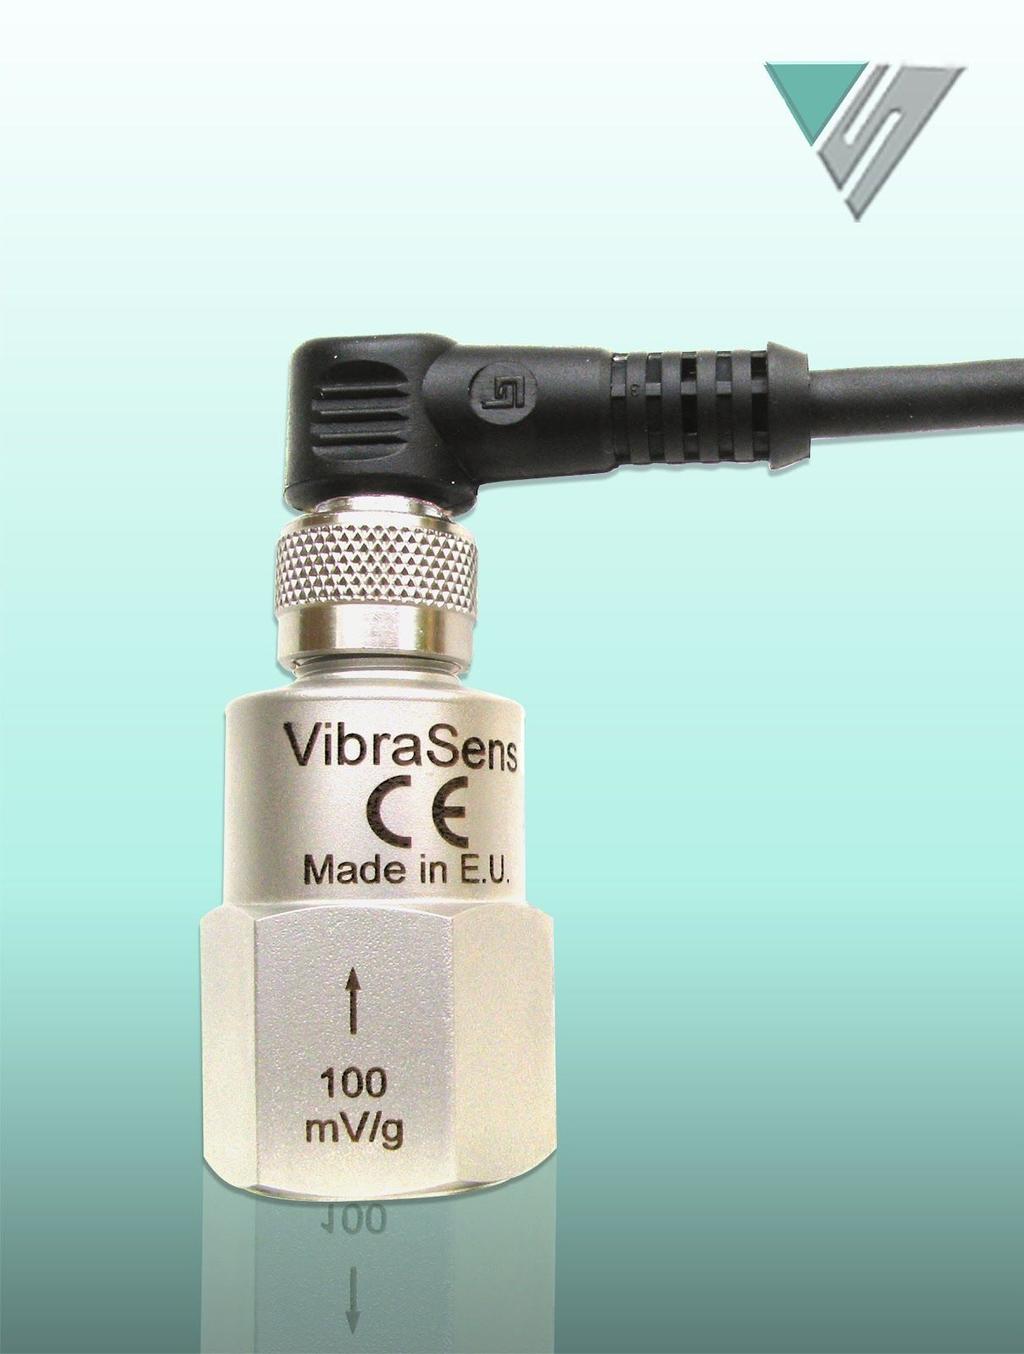 IEPE Premium Accelerometer, Top Connector Main Characteristics Atex Approved for zone 0, 1, 2.